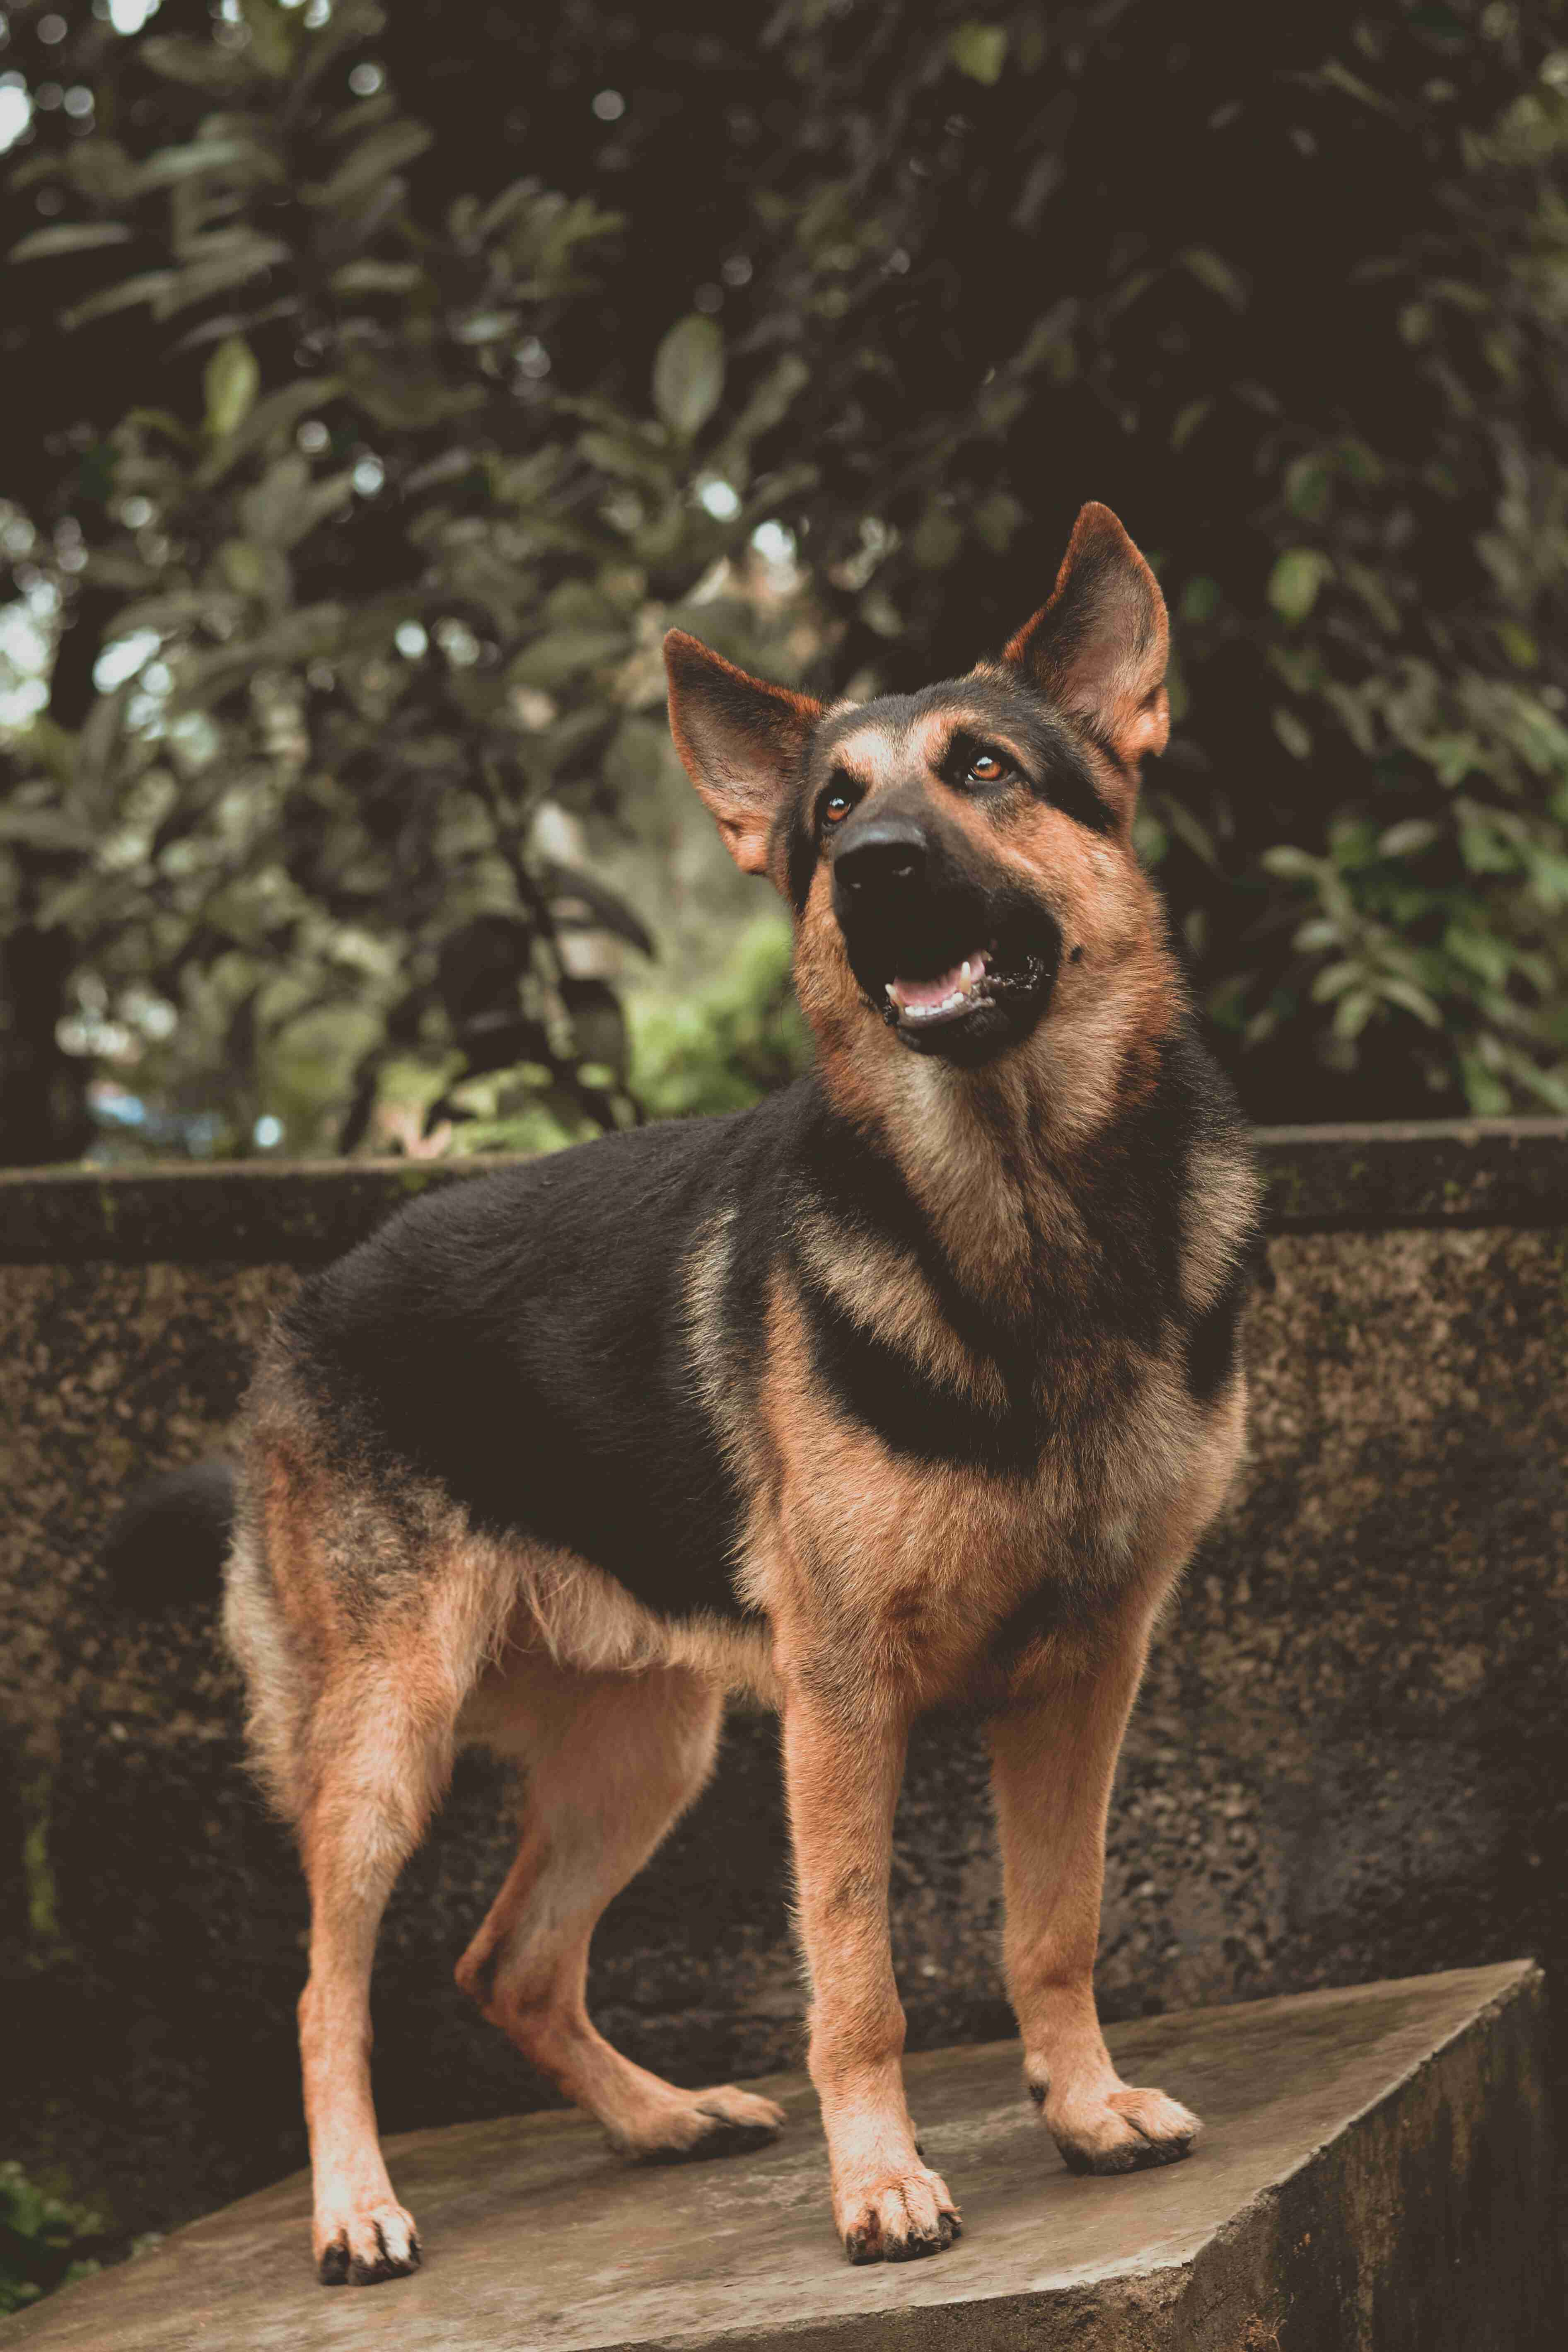 Can German shepherds be trained to do tricks?